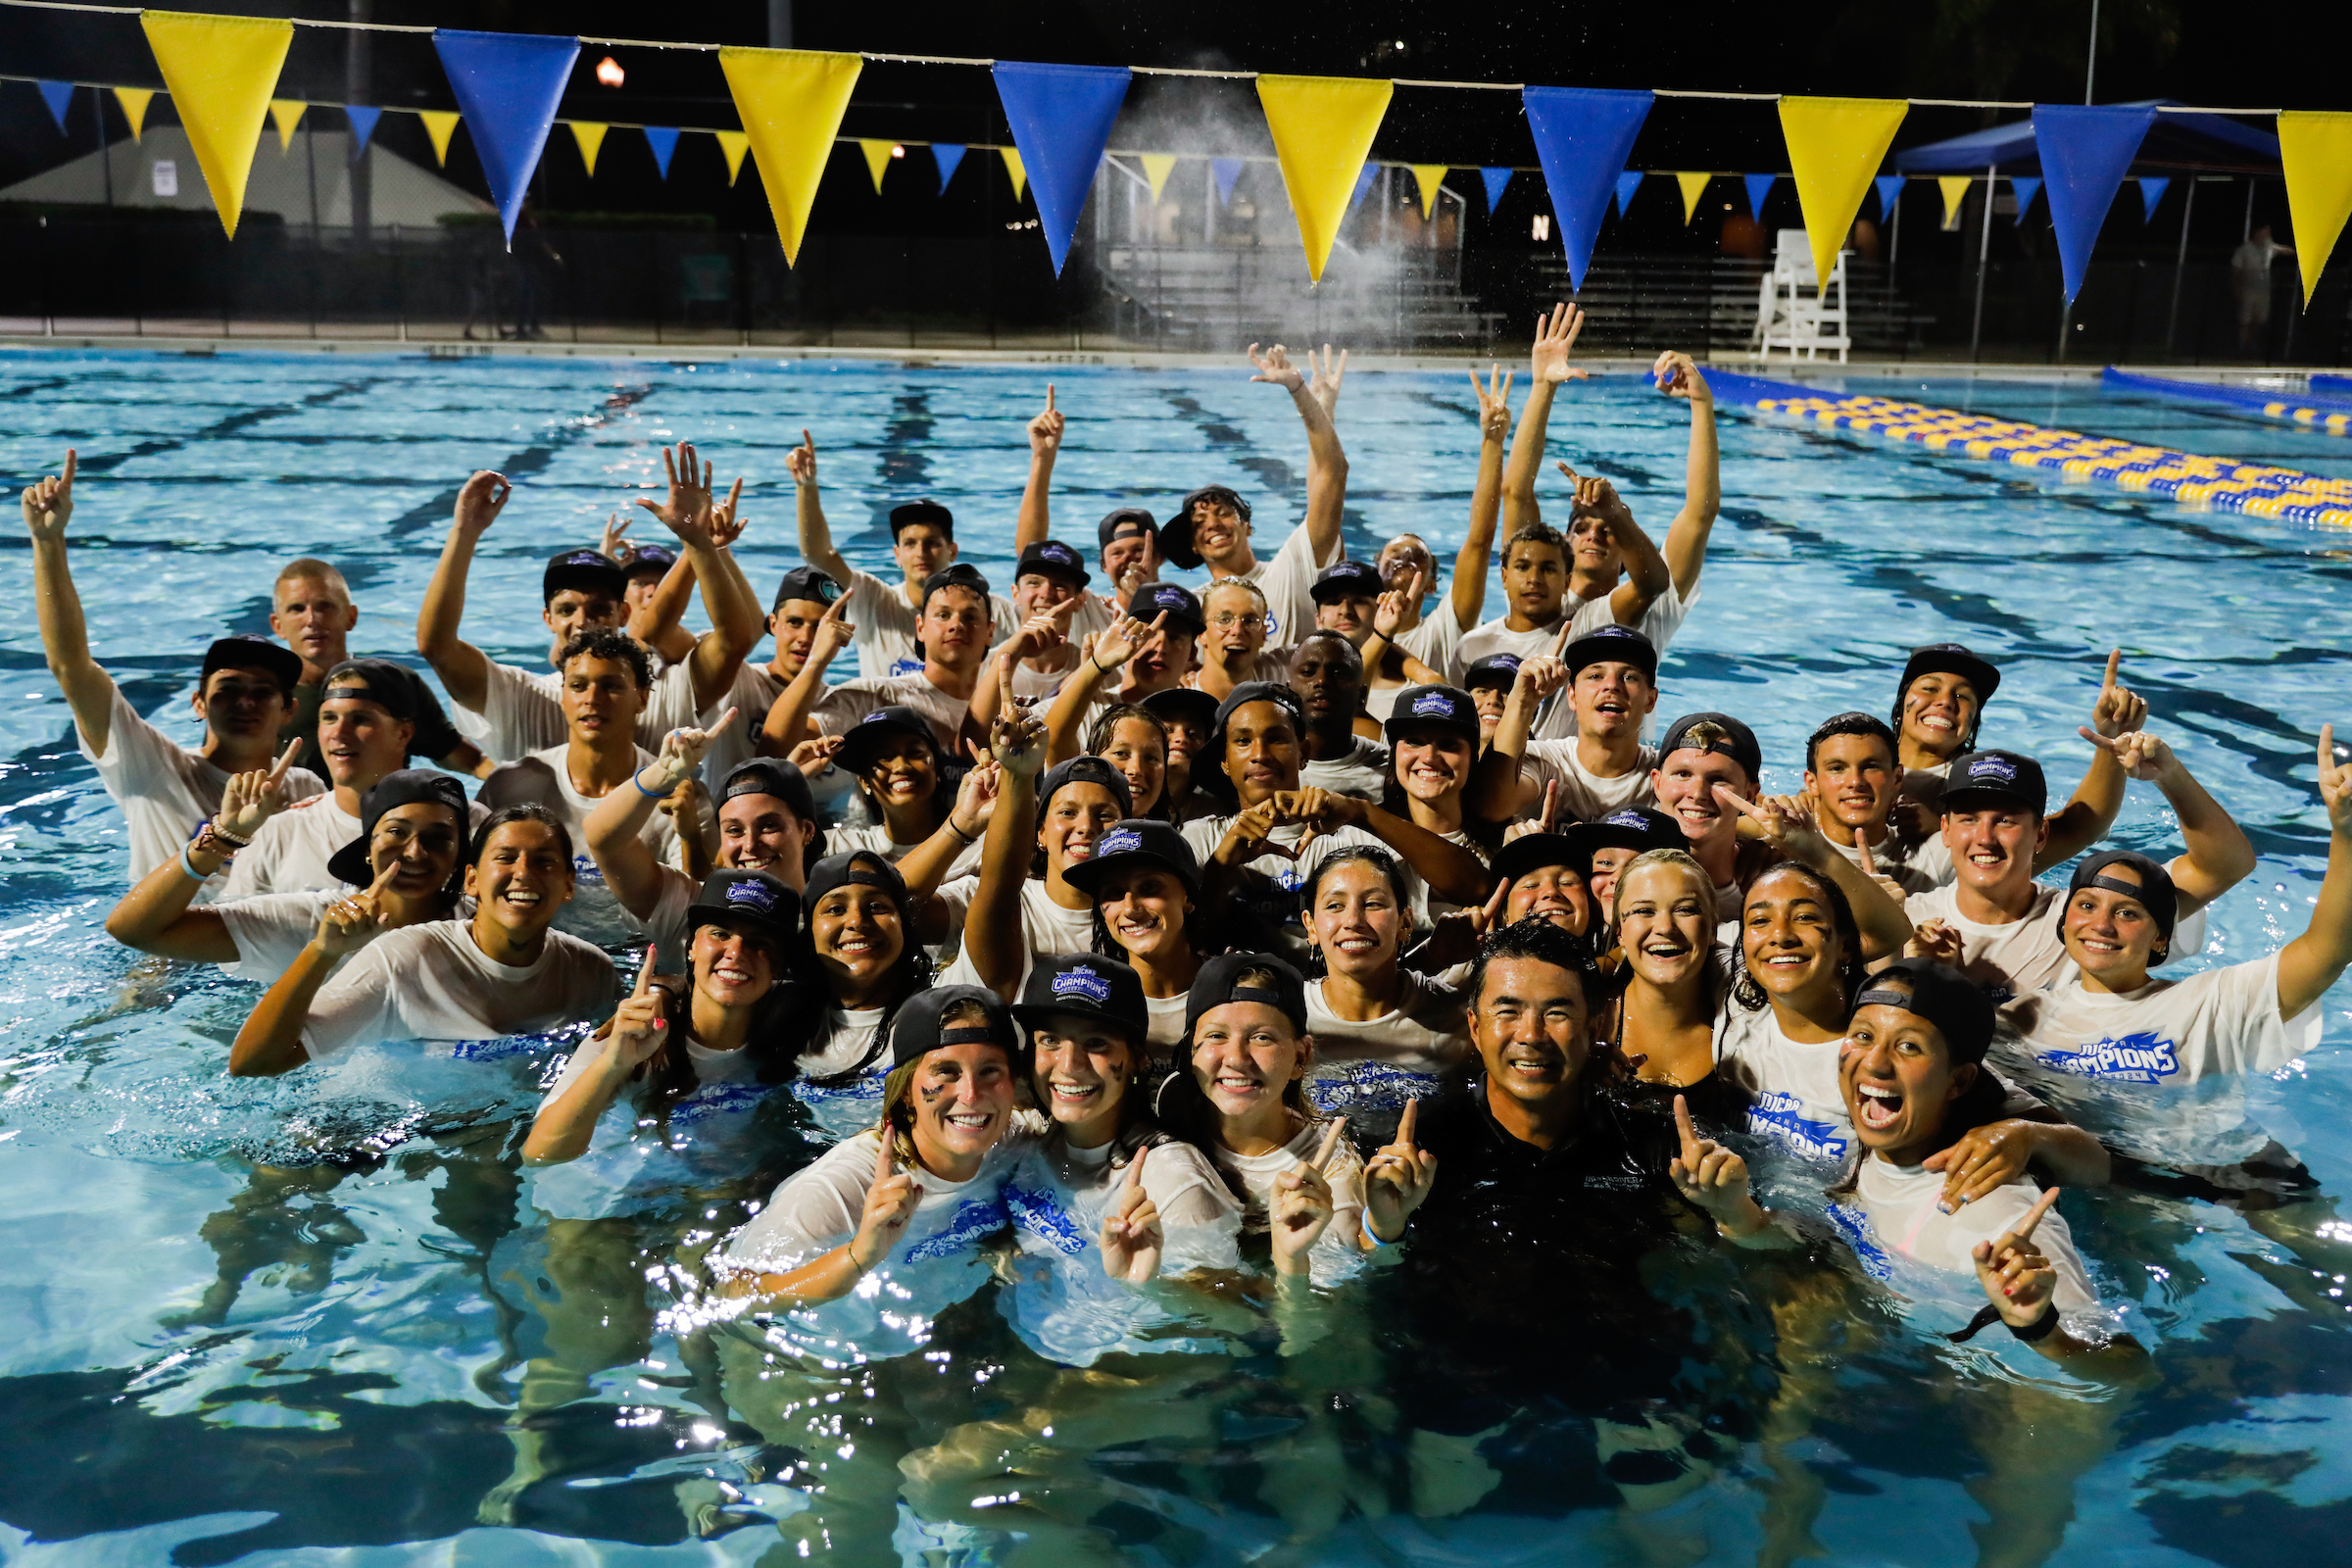 Student athletes in the pool celebrating their teams wins